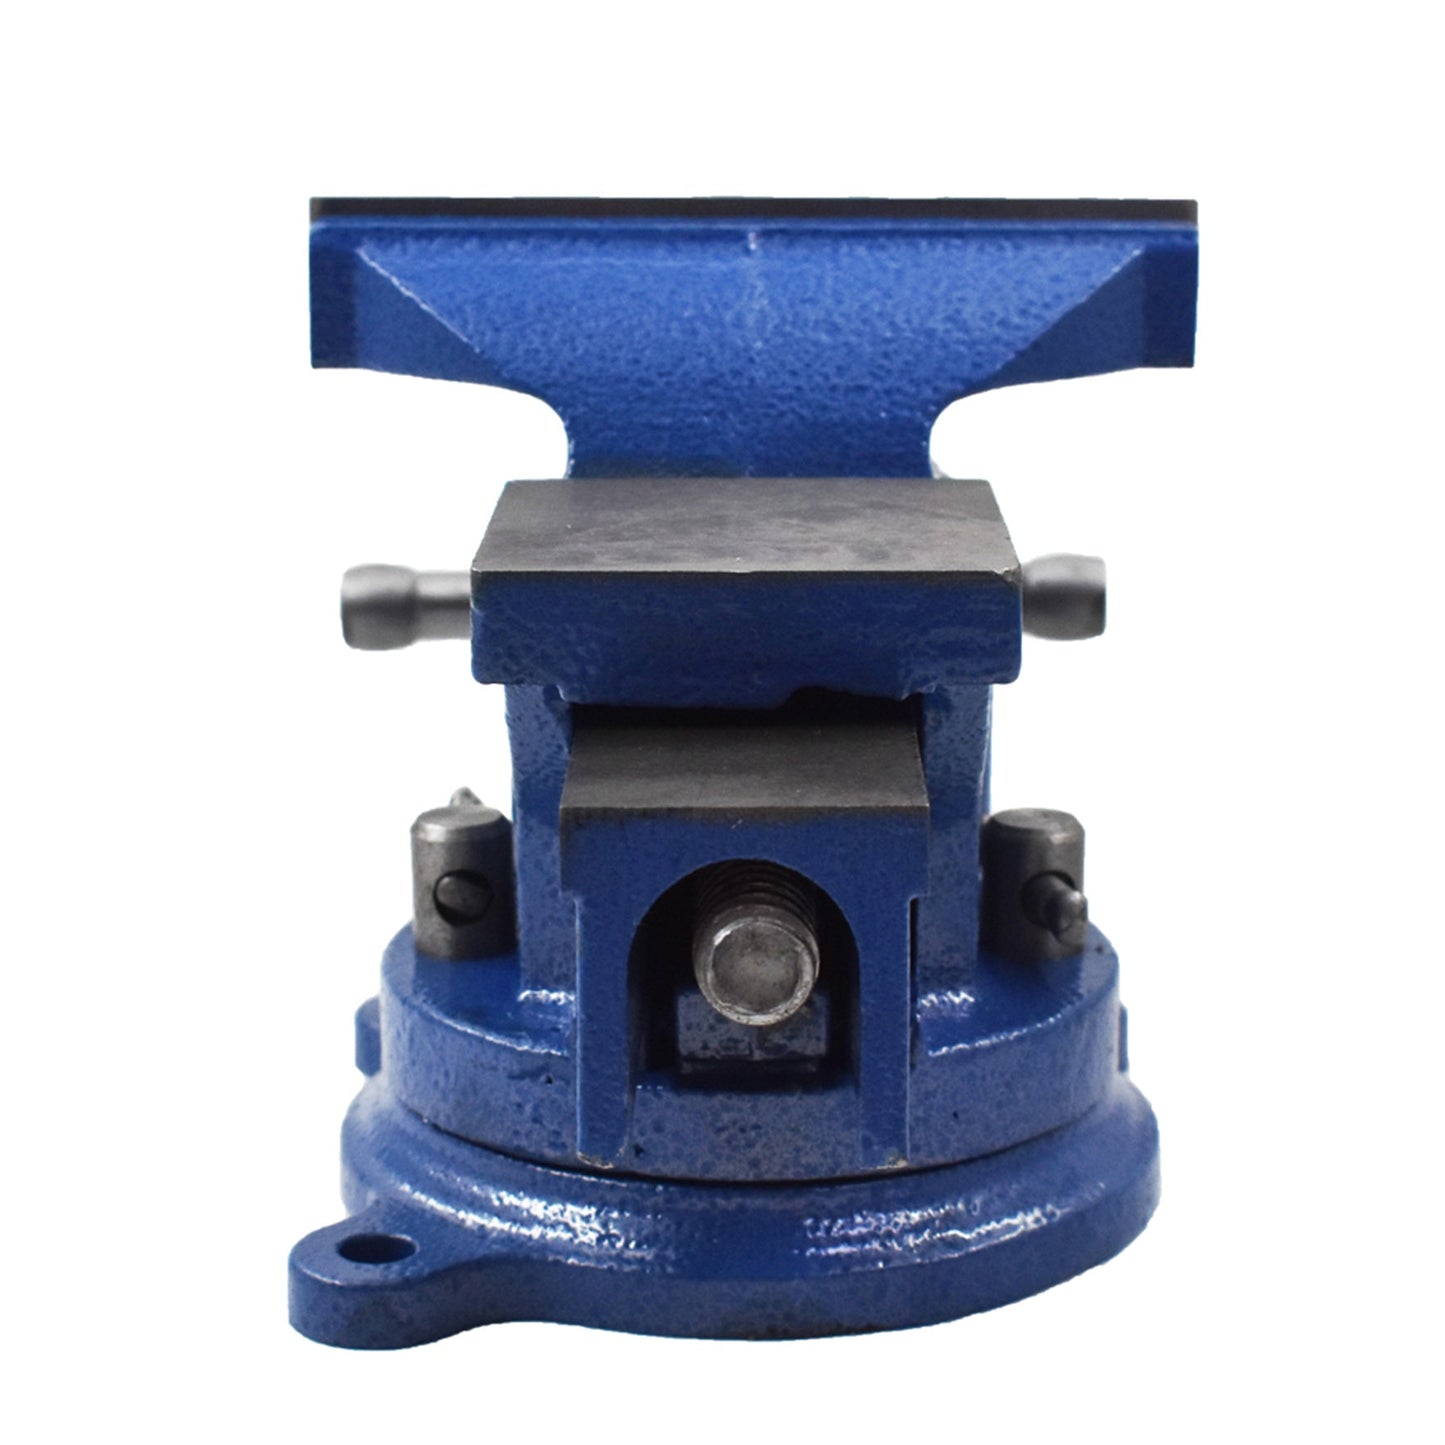 findmall 5" Bench Vise with Anvil 360° Swivel Locking Base Table top Clamp Heavy Duty Vice FINDMALLPARTS